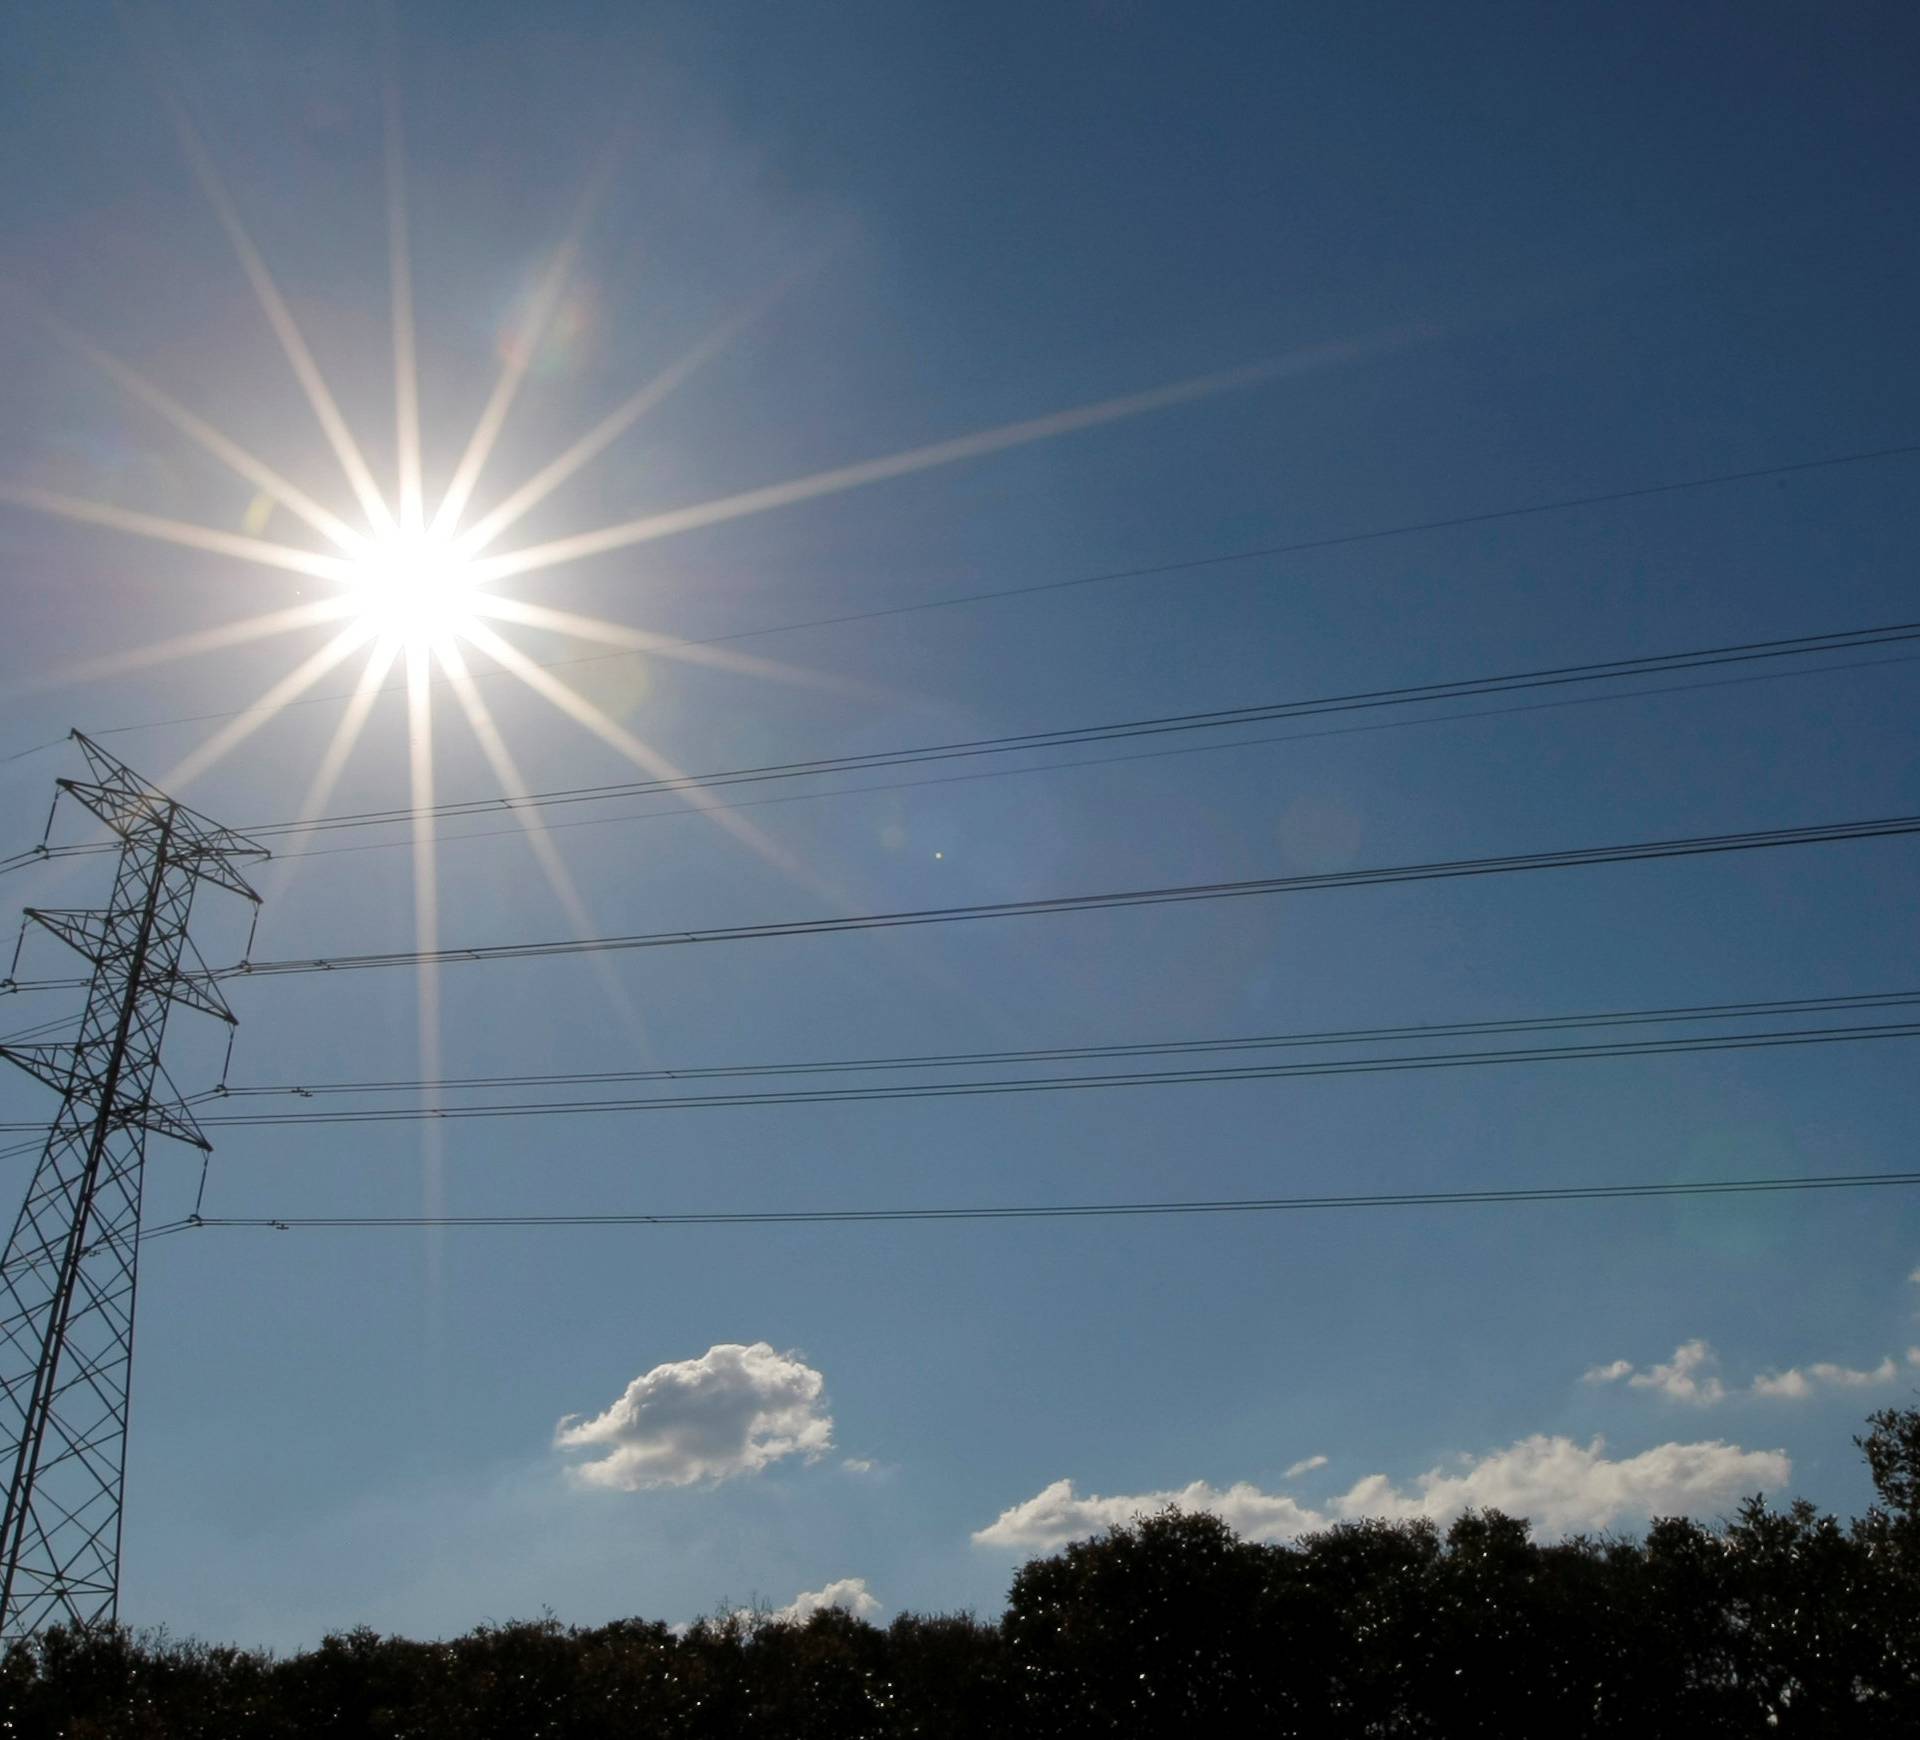 FILE PHOTO: Sun shines over a high tension power line in an industrial area of Sydney